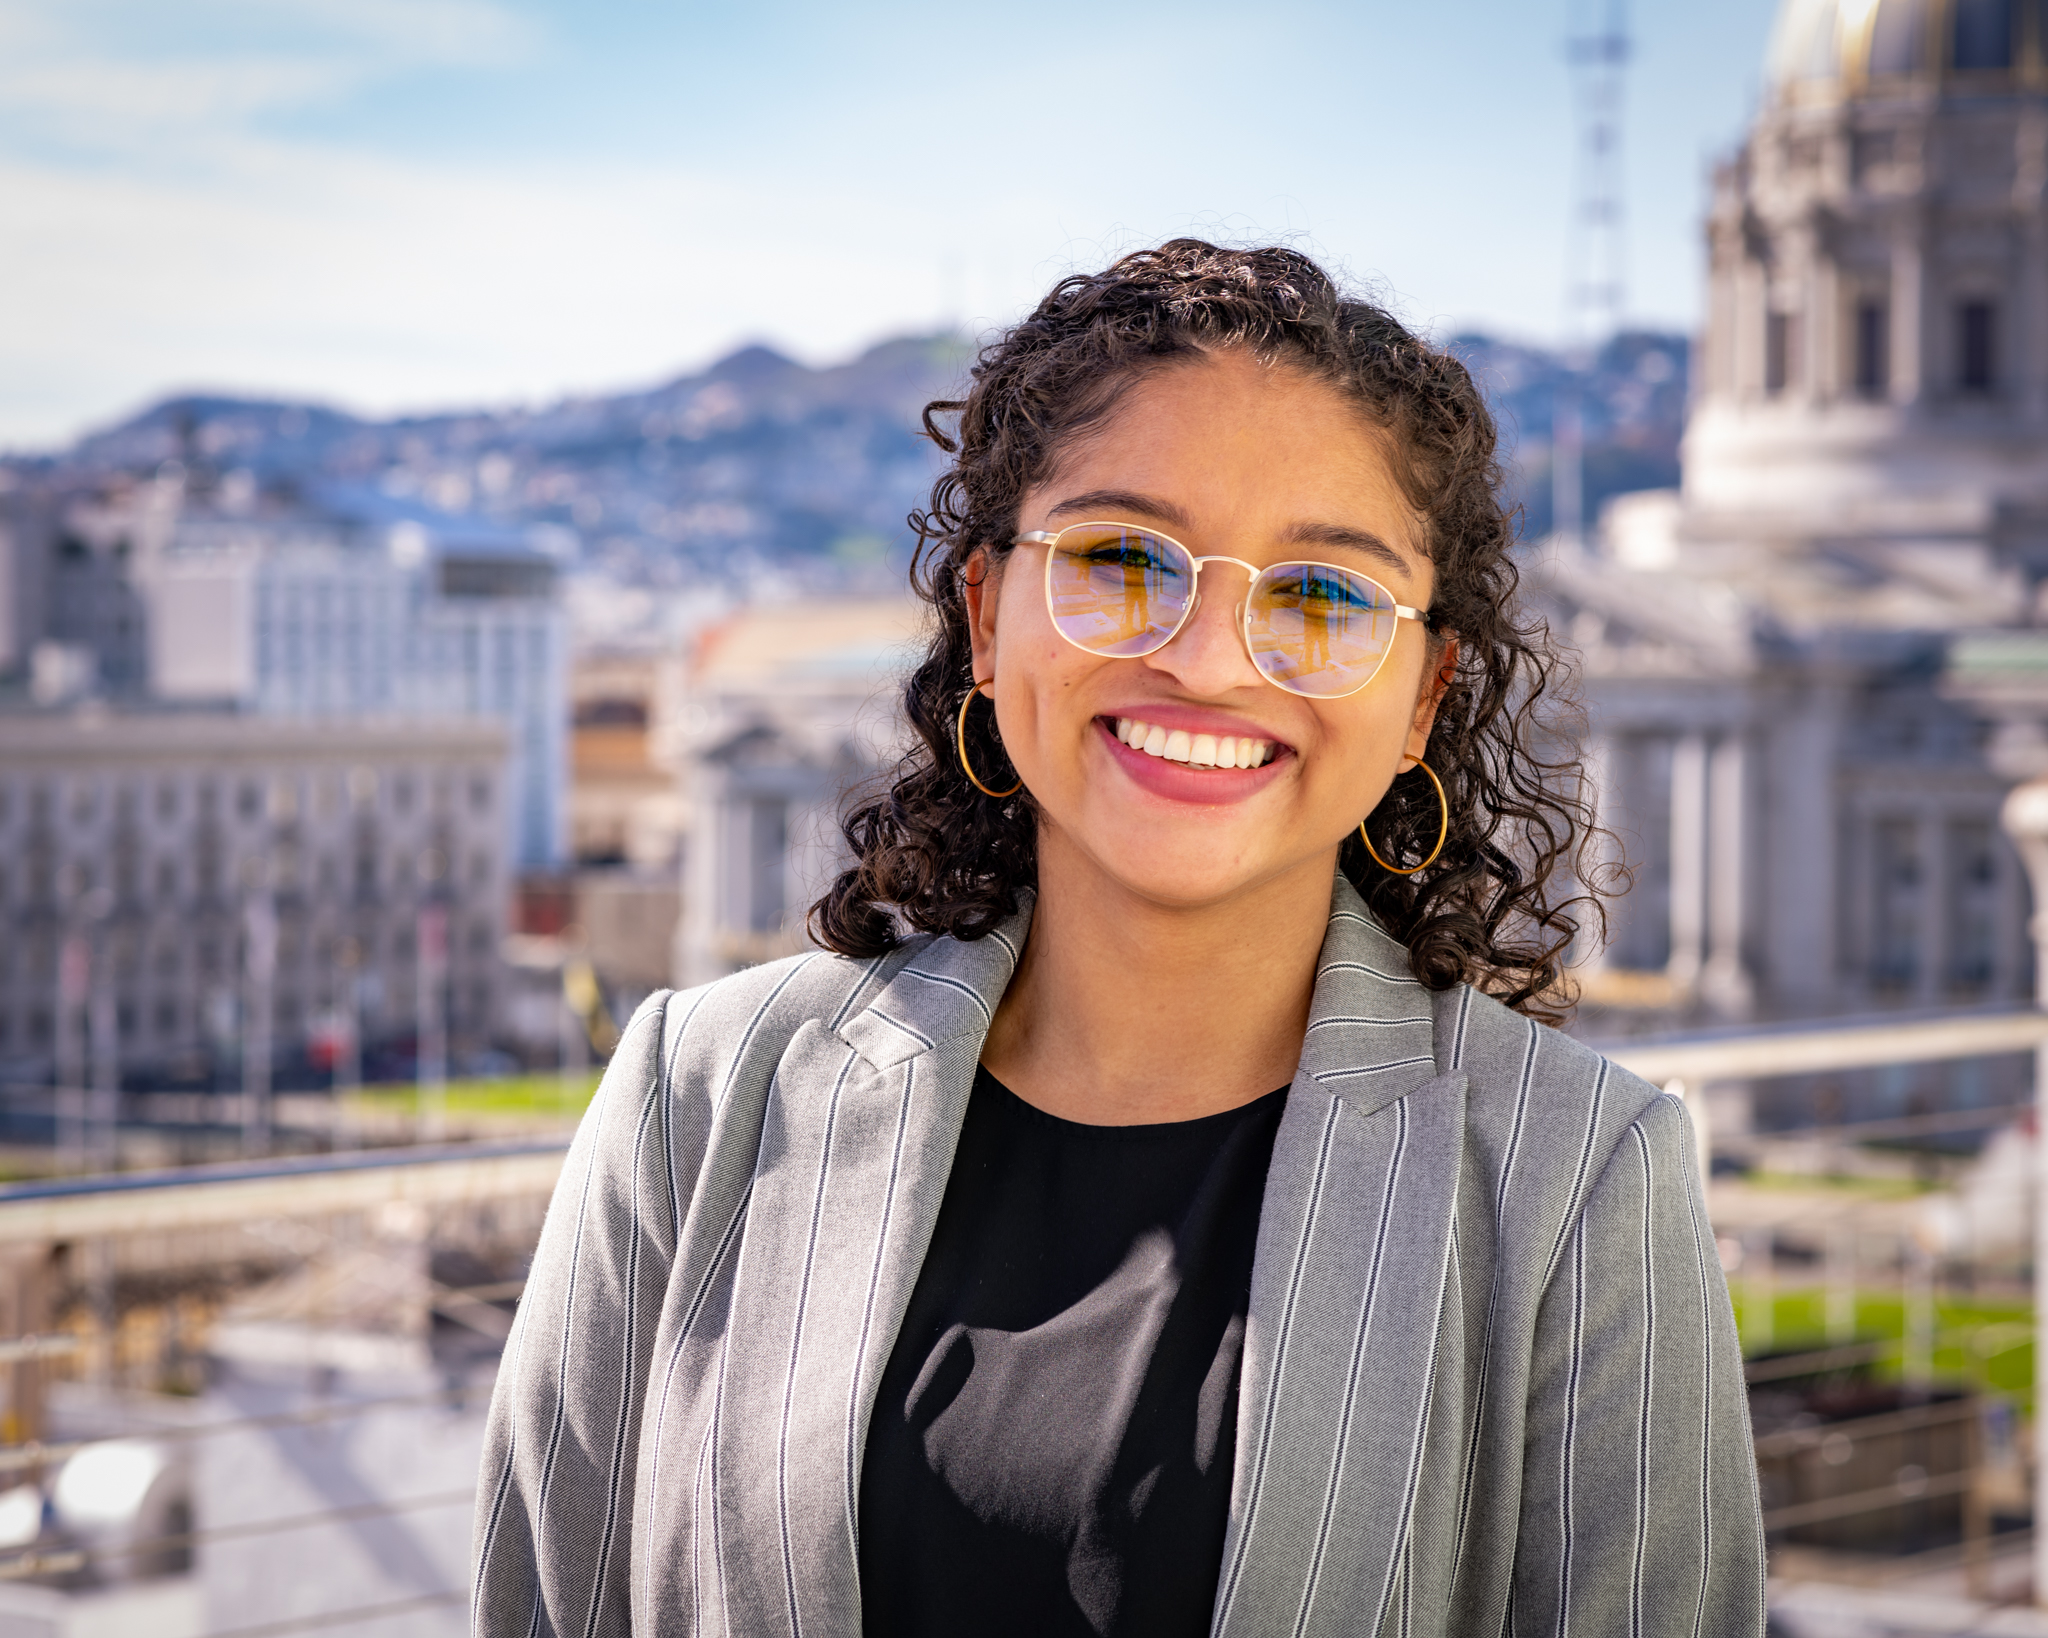 Hispanic woman with long, curly brown hair, wearing a gray suit jacket and black shirt, smiling in front of a state or federal capital building. 